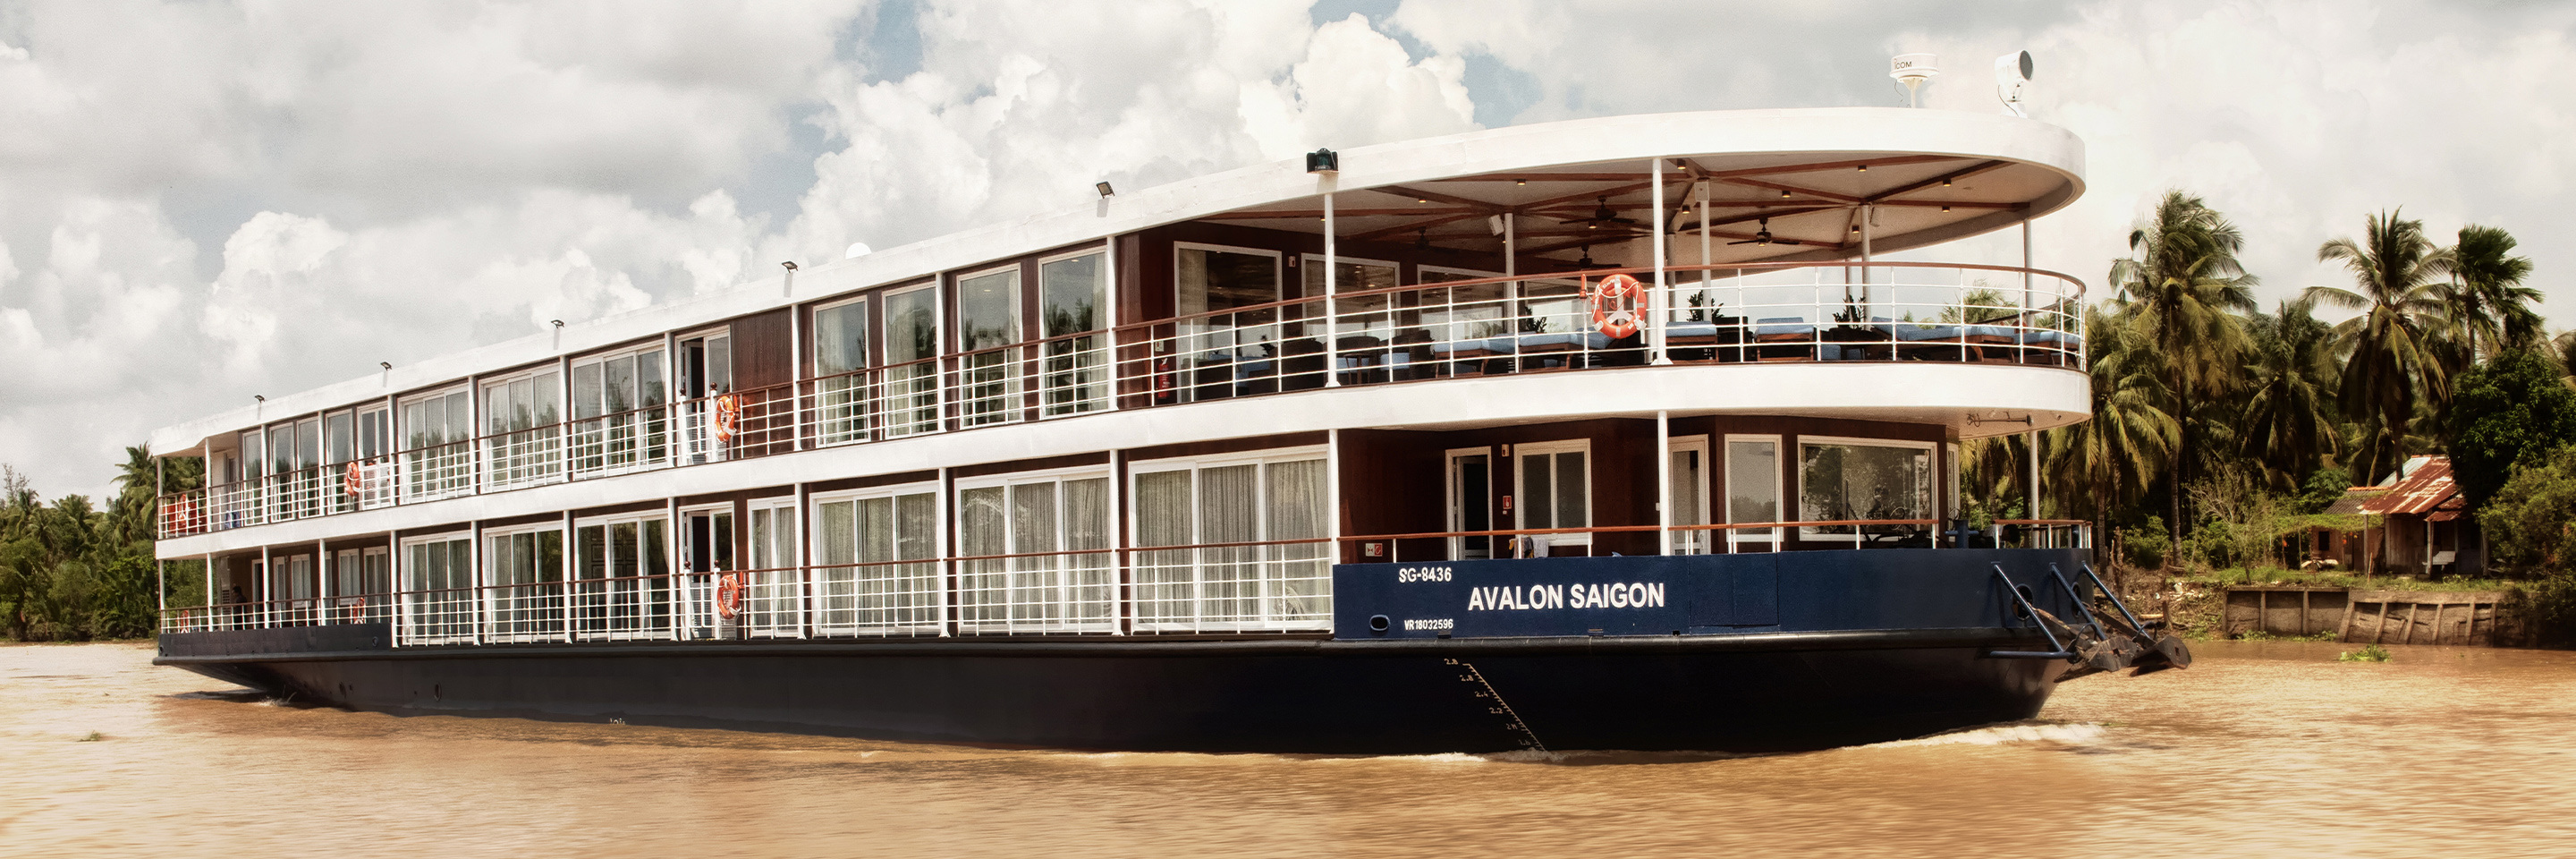 Photograph of the Avalon Saigon river cruiser, as it travels through jungle waters